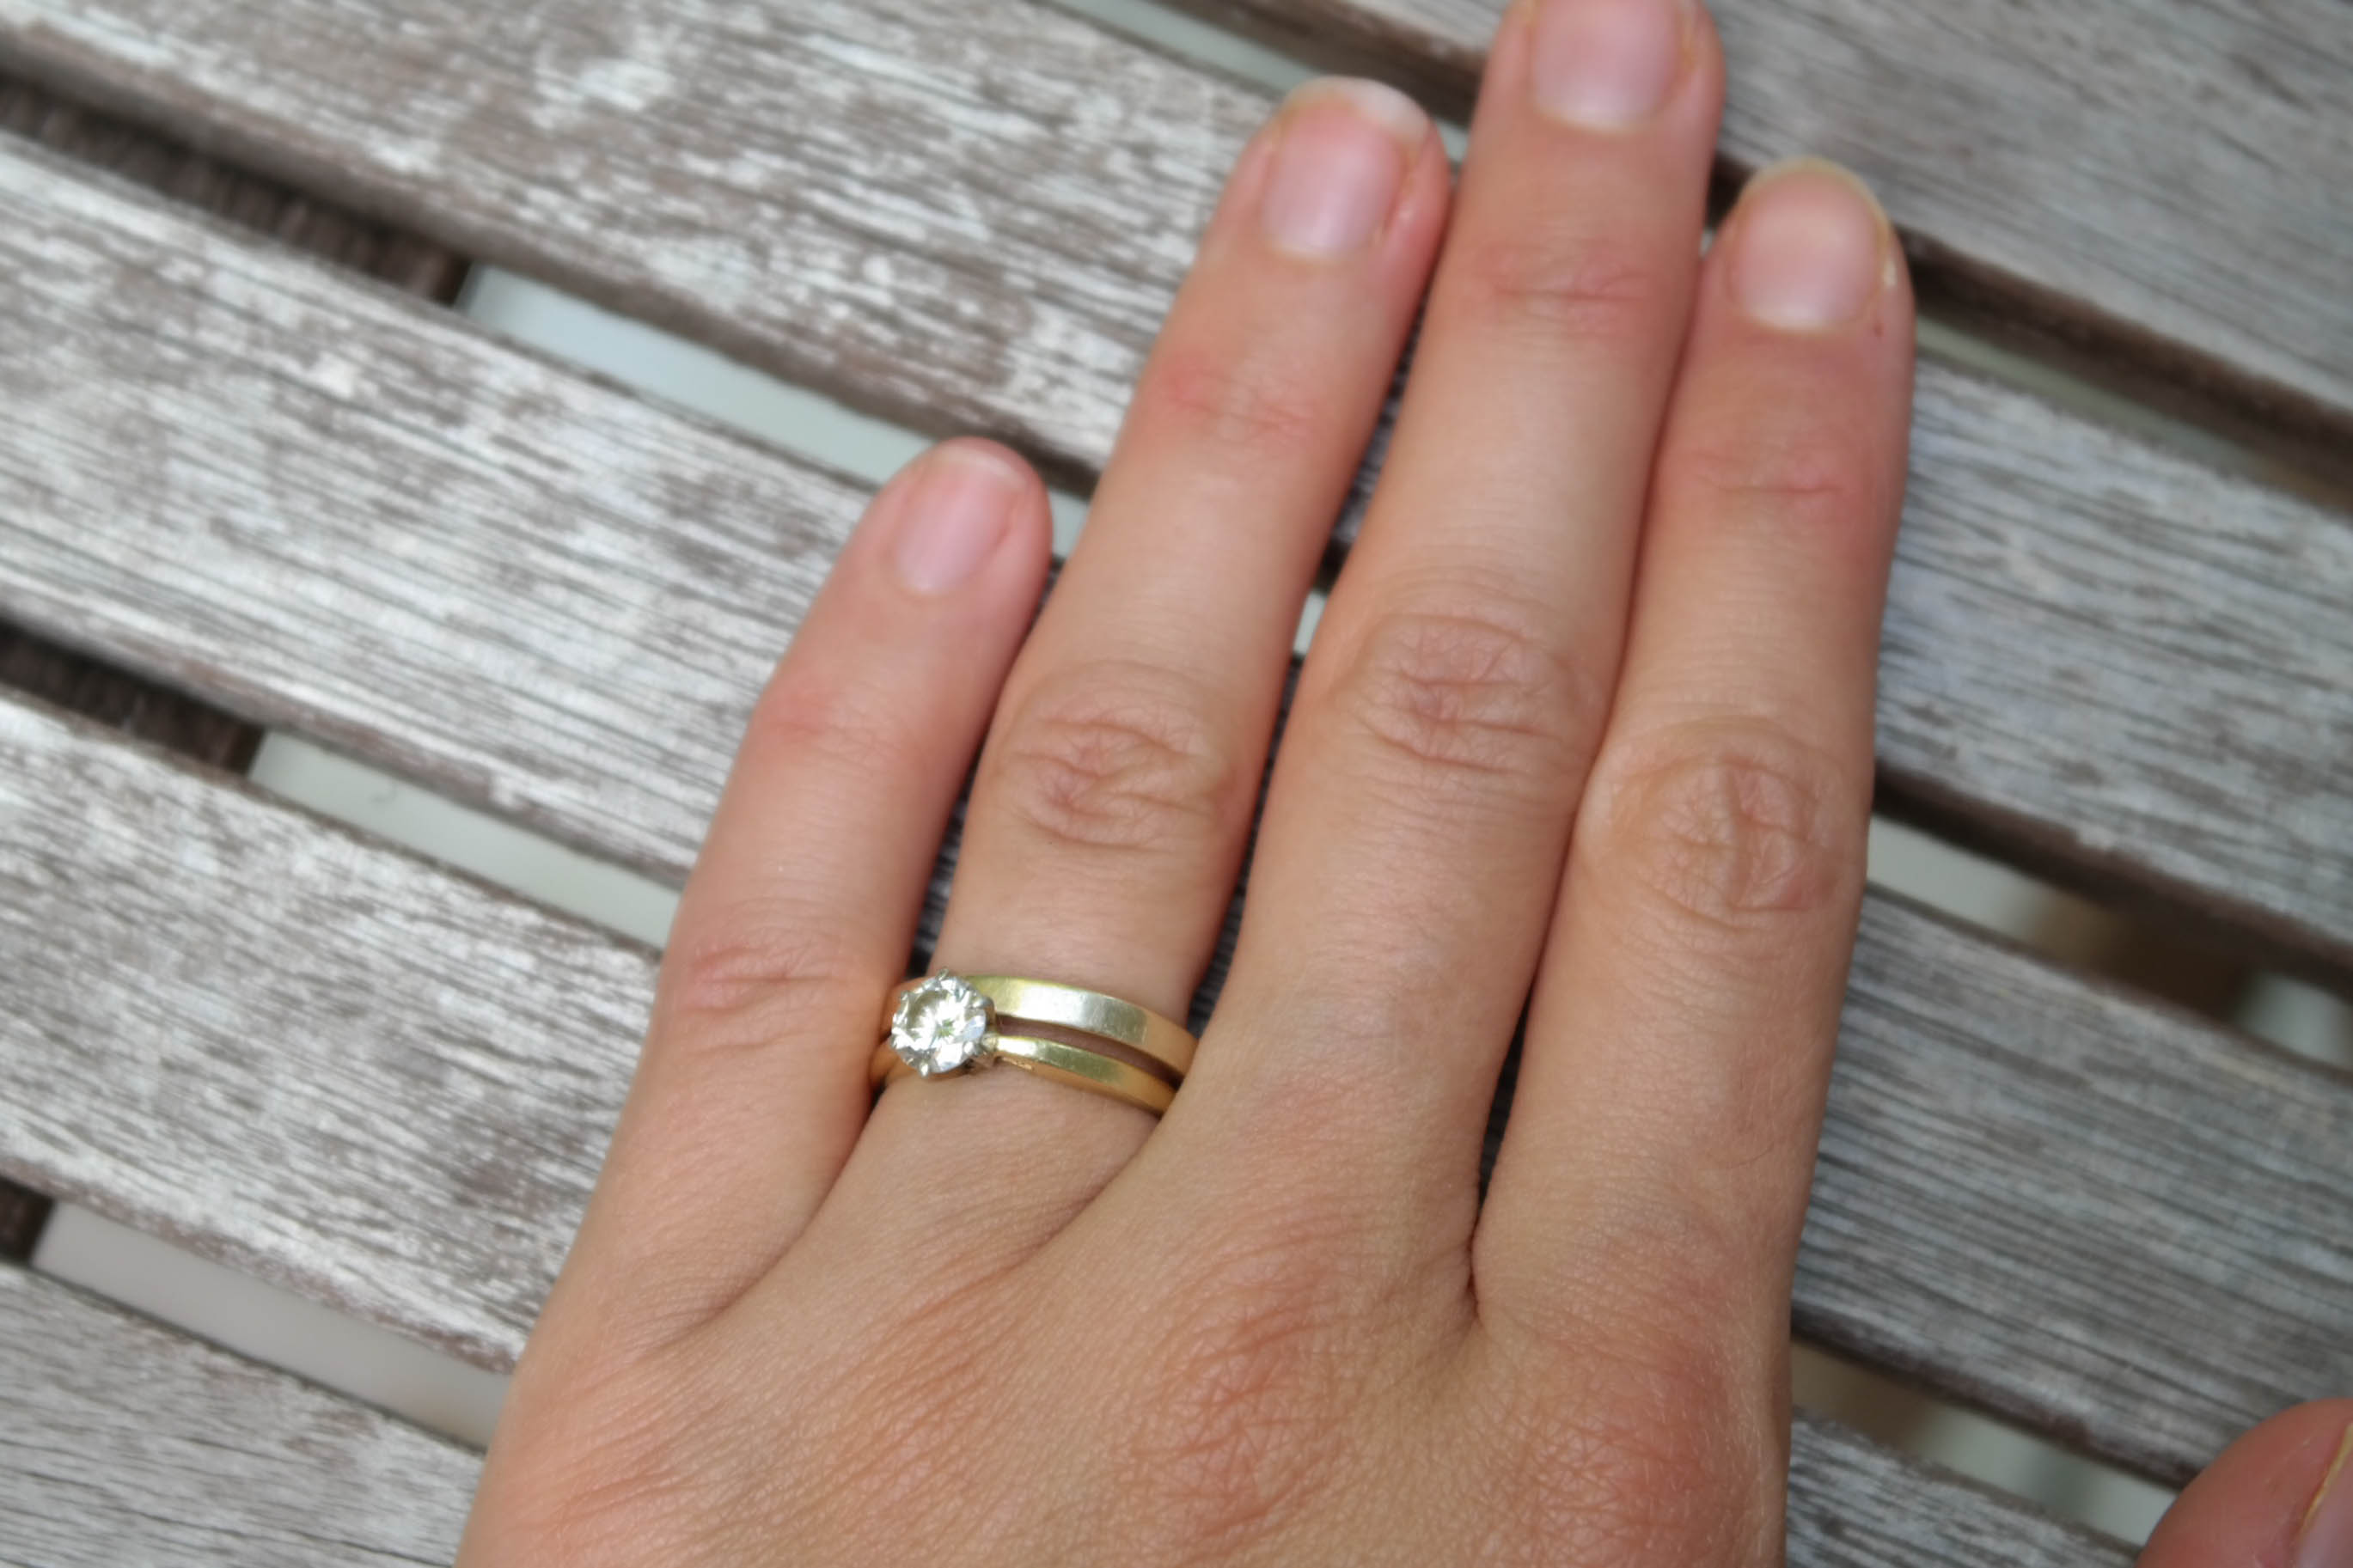 Why I Don't Wear My Engagement Ring | HuffPost Life